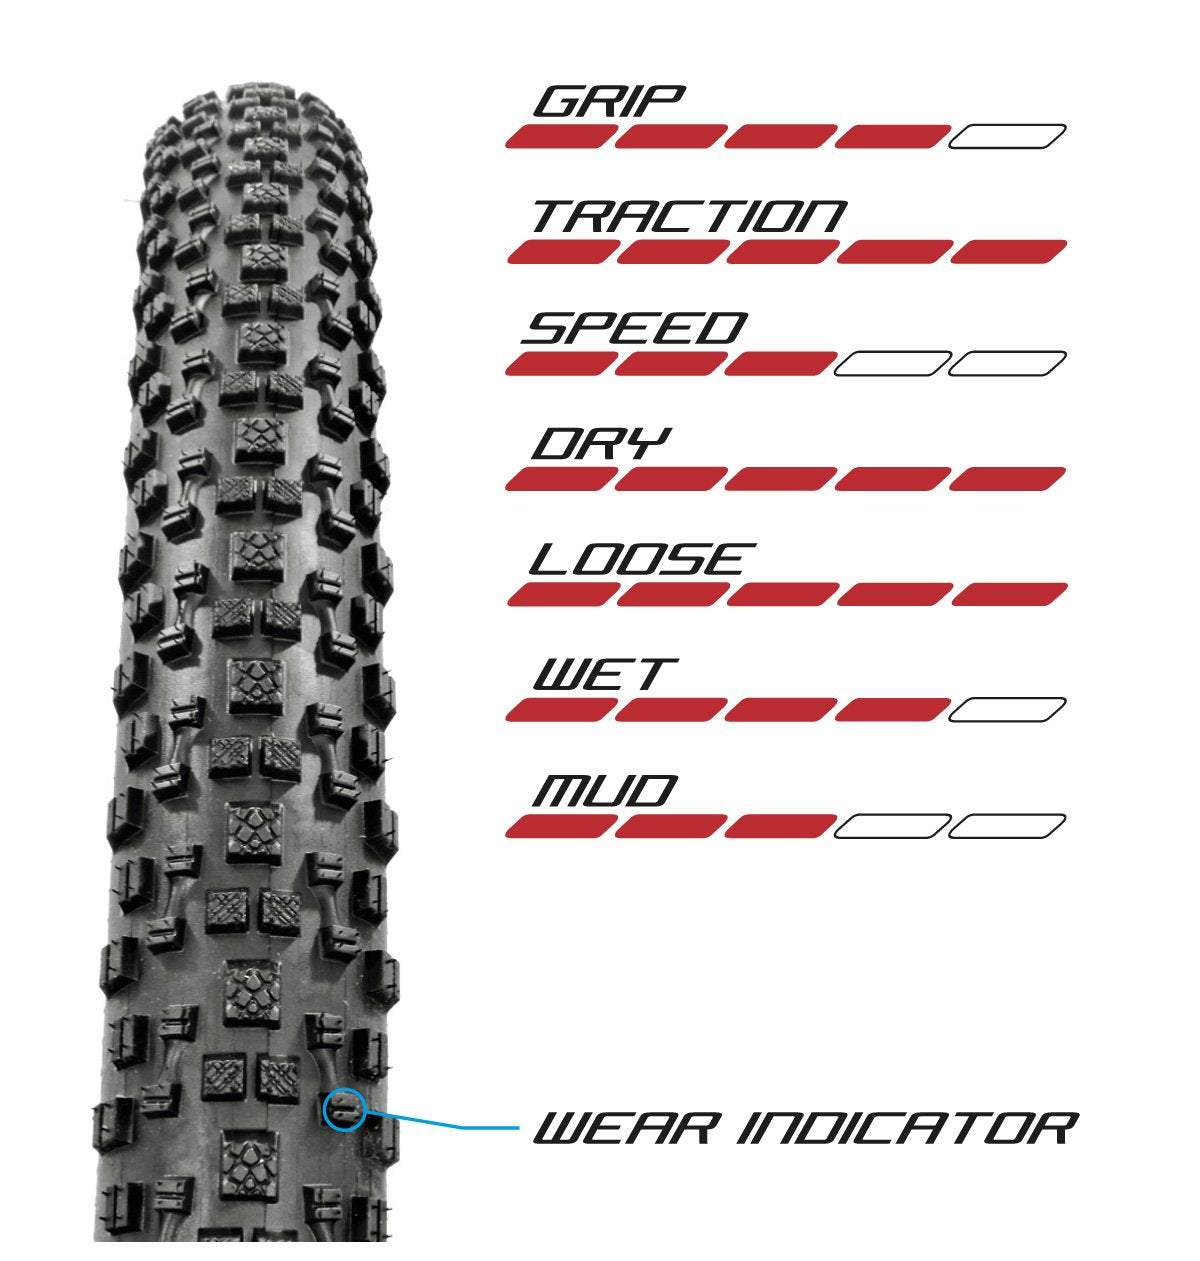 TRACTOR 27.5 X 2.20 TUBELESS READY 2C XC PRO